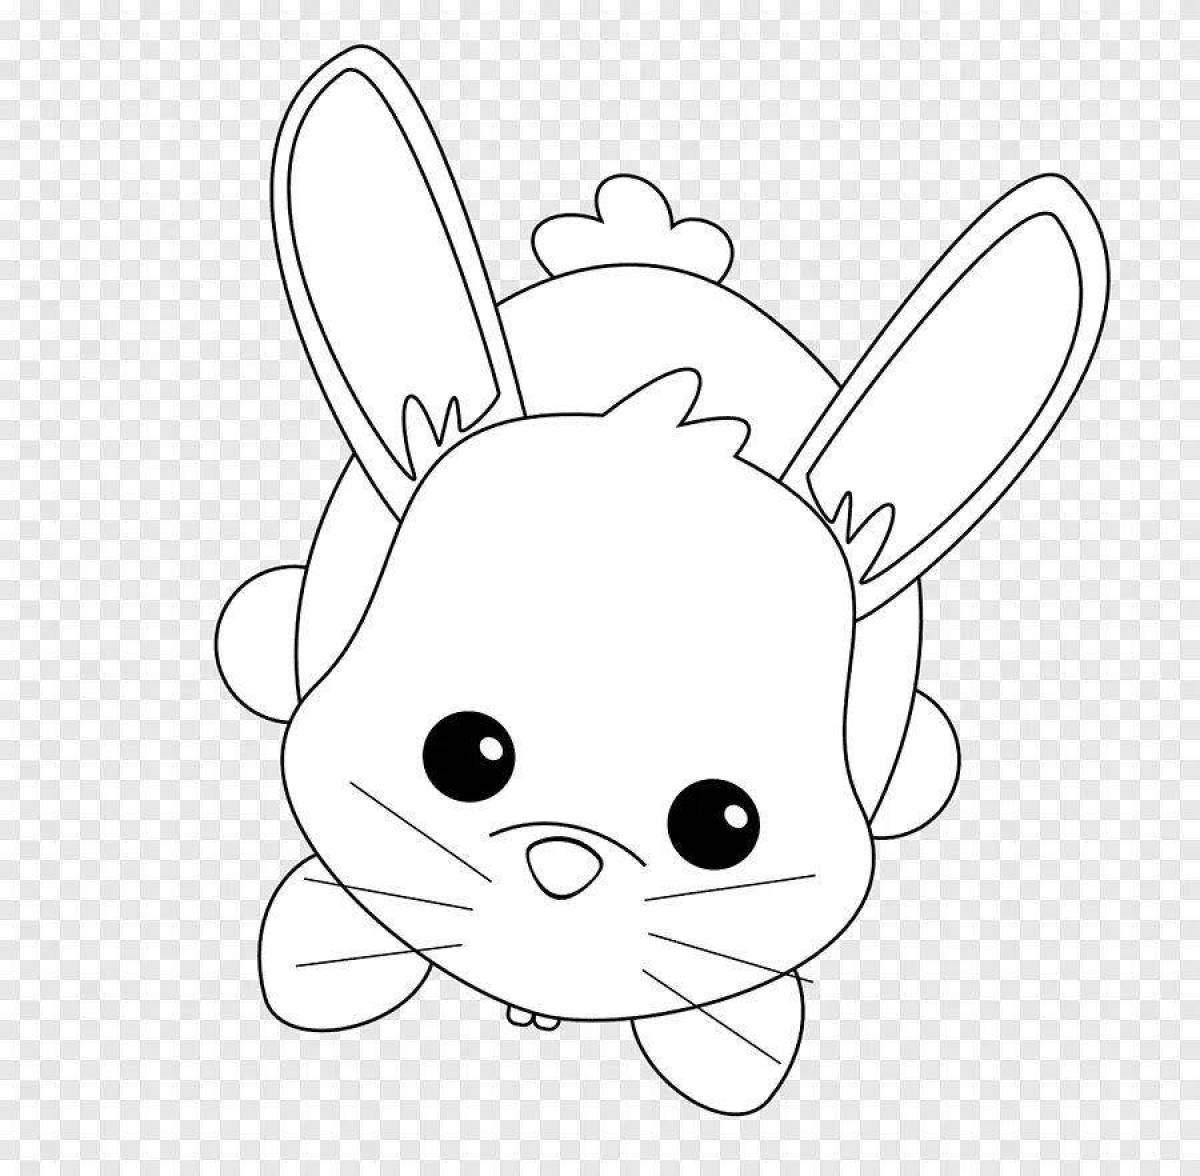 Home Bunny Coloring Page